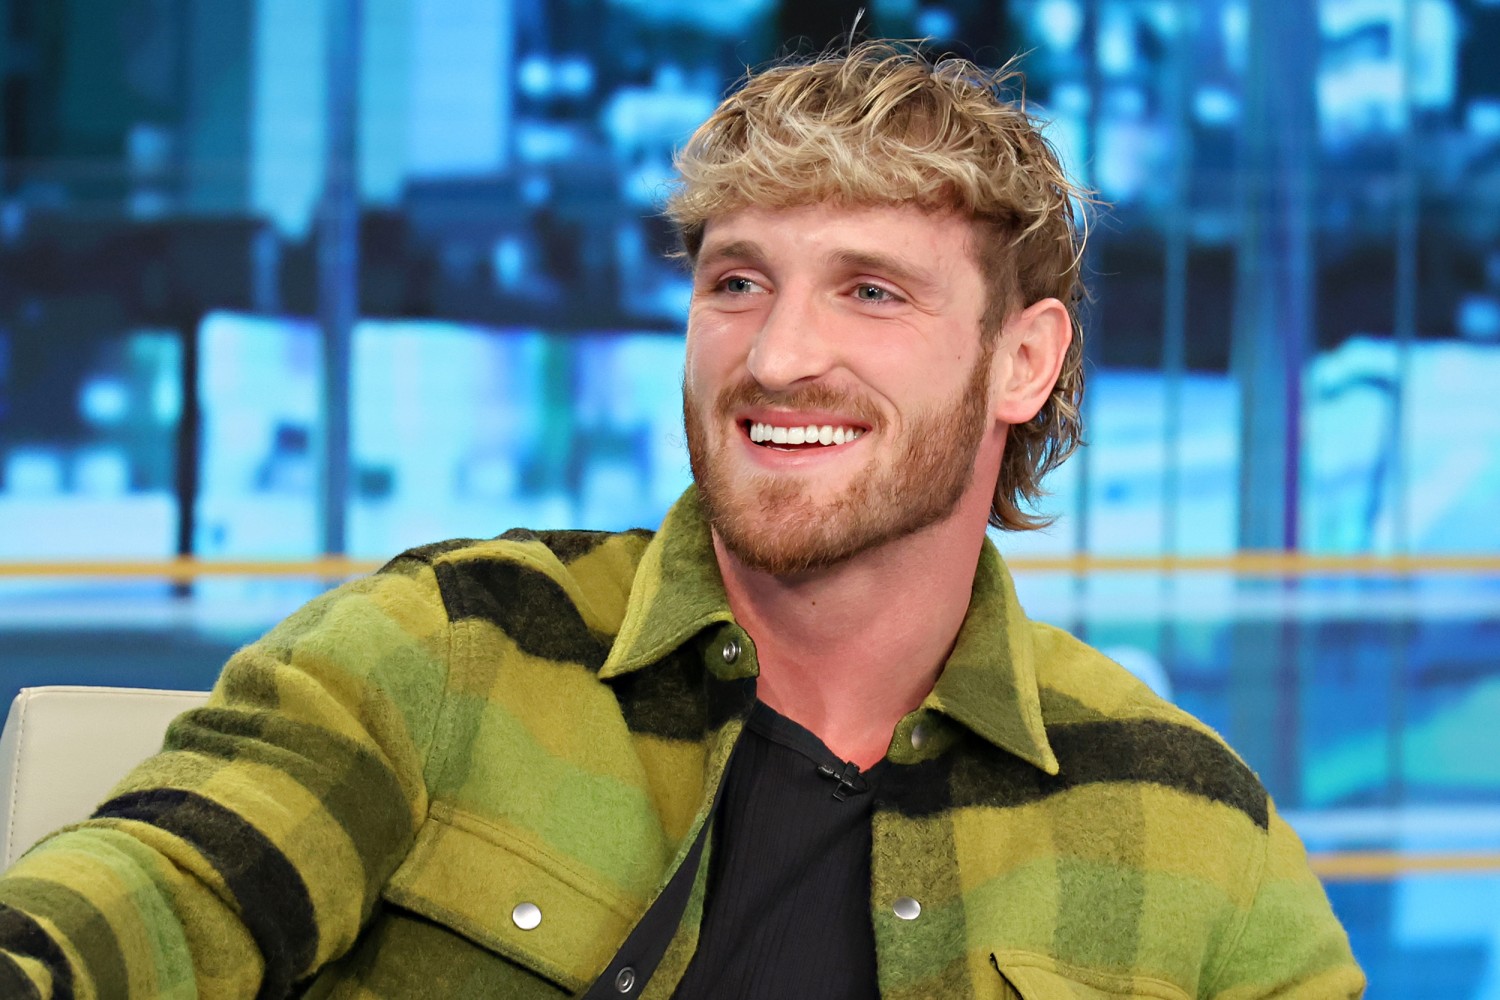 Logan Paul announces he will buy back NFTs from his failed CryptoZoo project